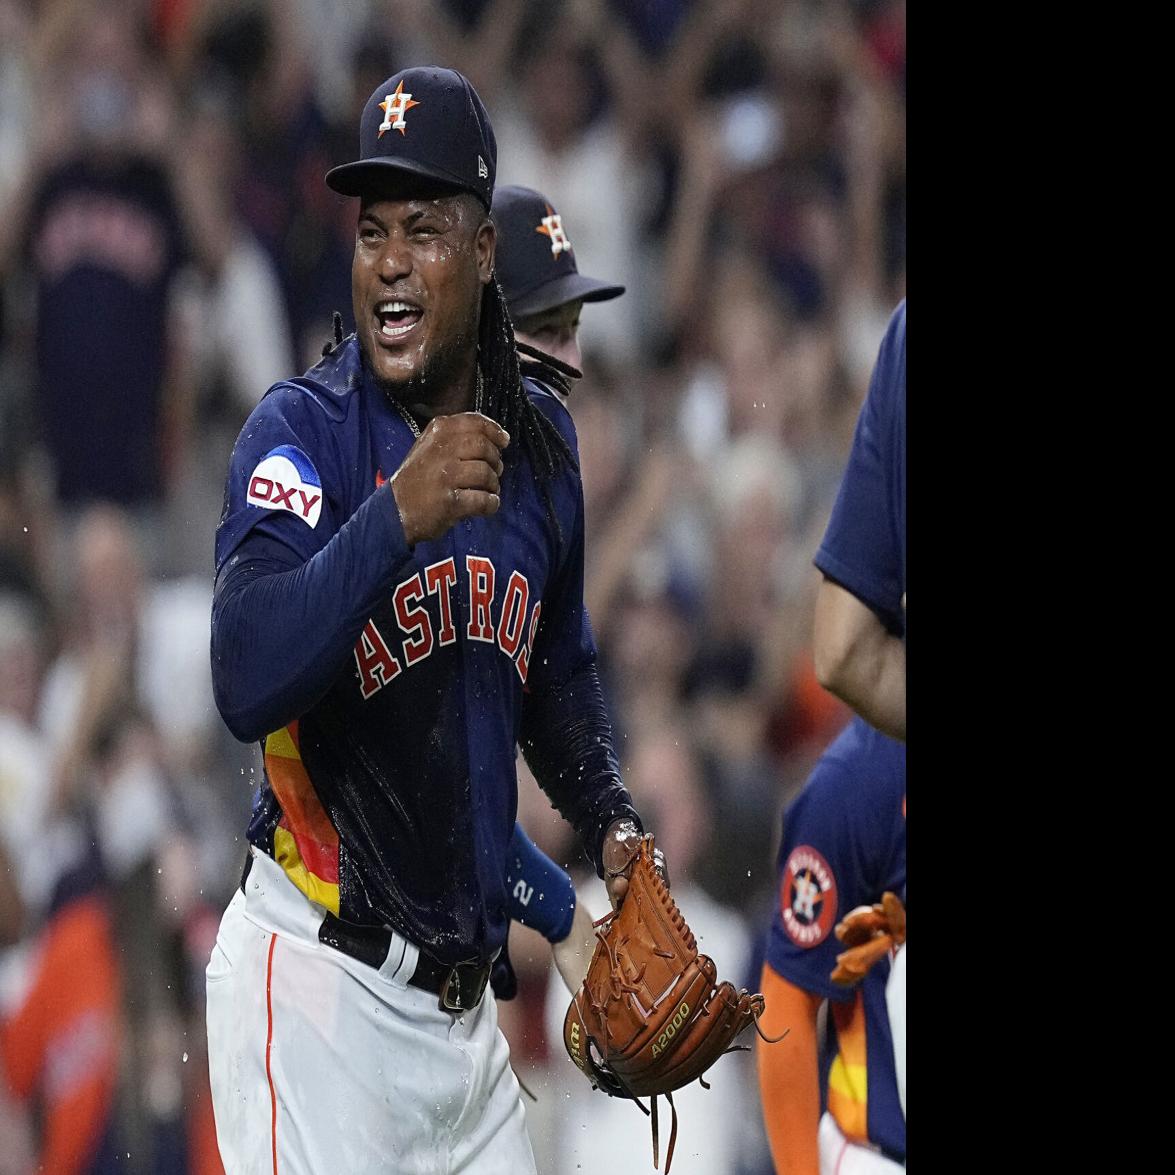 MLB Team Plays Ace Of Base 'The Sign' During Astros Warmup